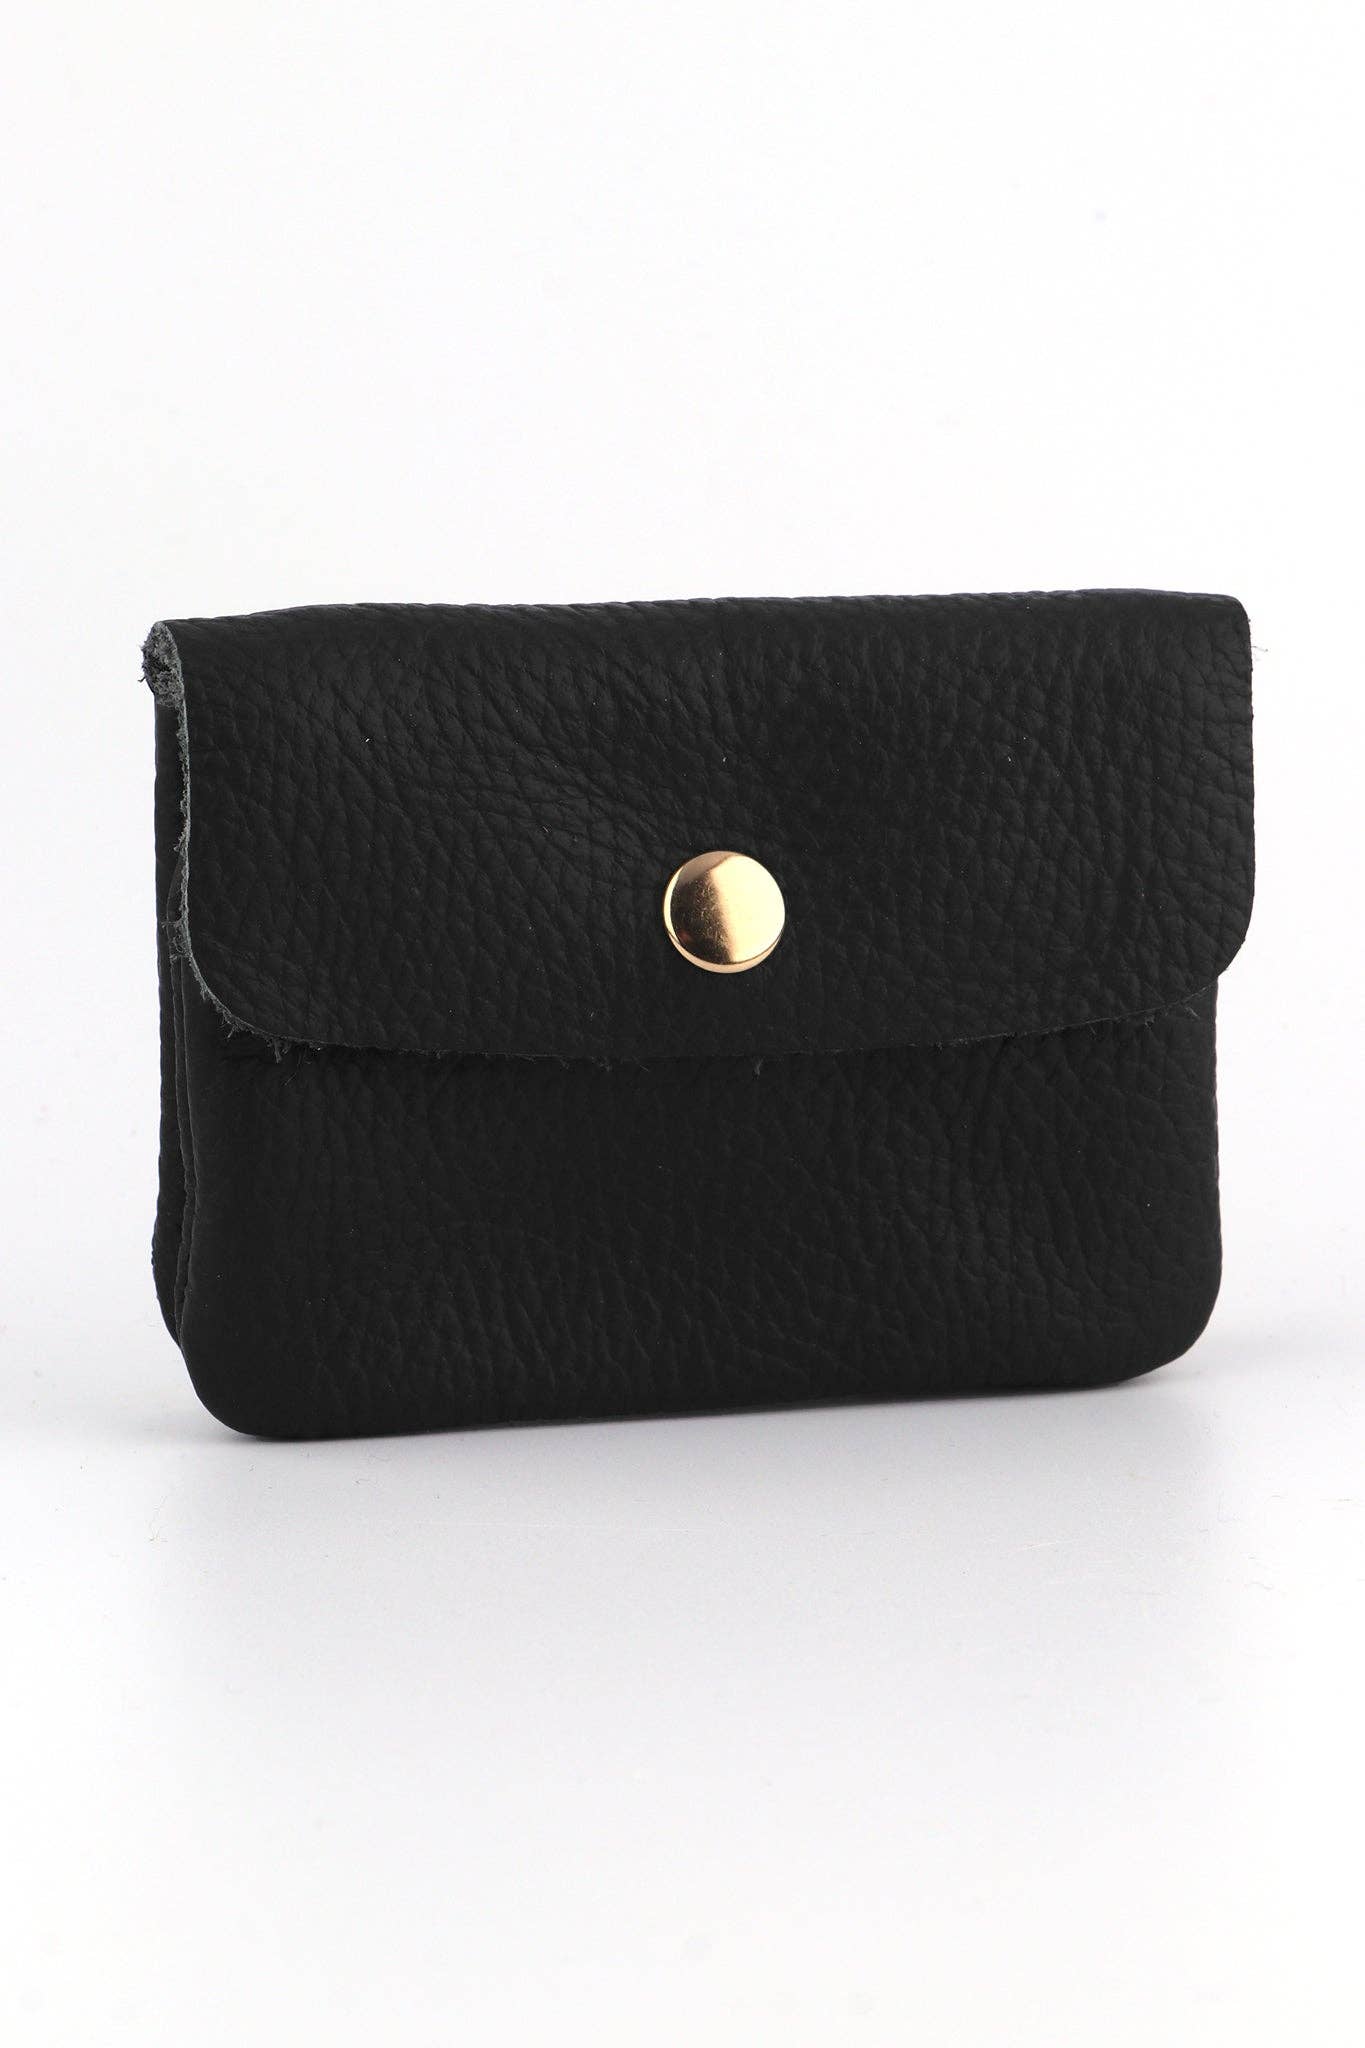 Pierre Cardin Italian Leather Coin Purse Genuine Wallet RFID Protection  Black | Woolworths